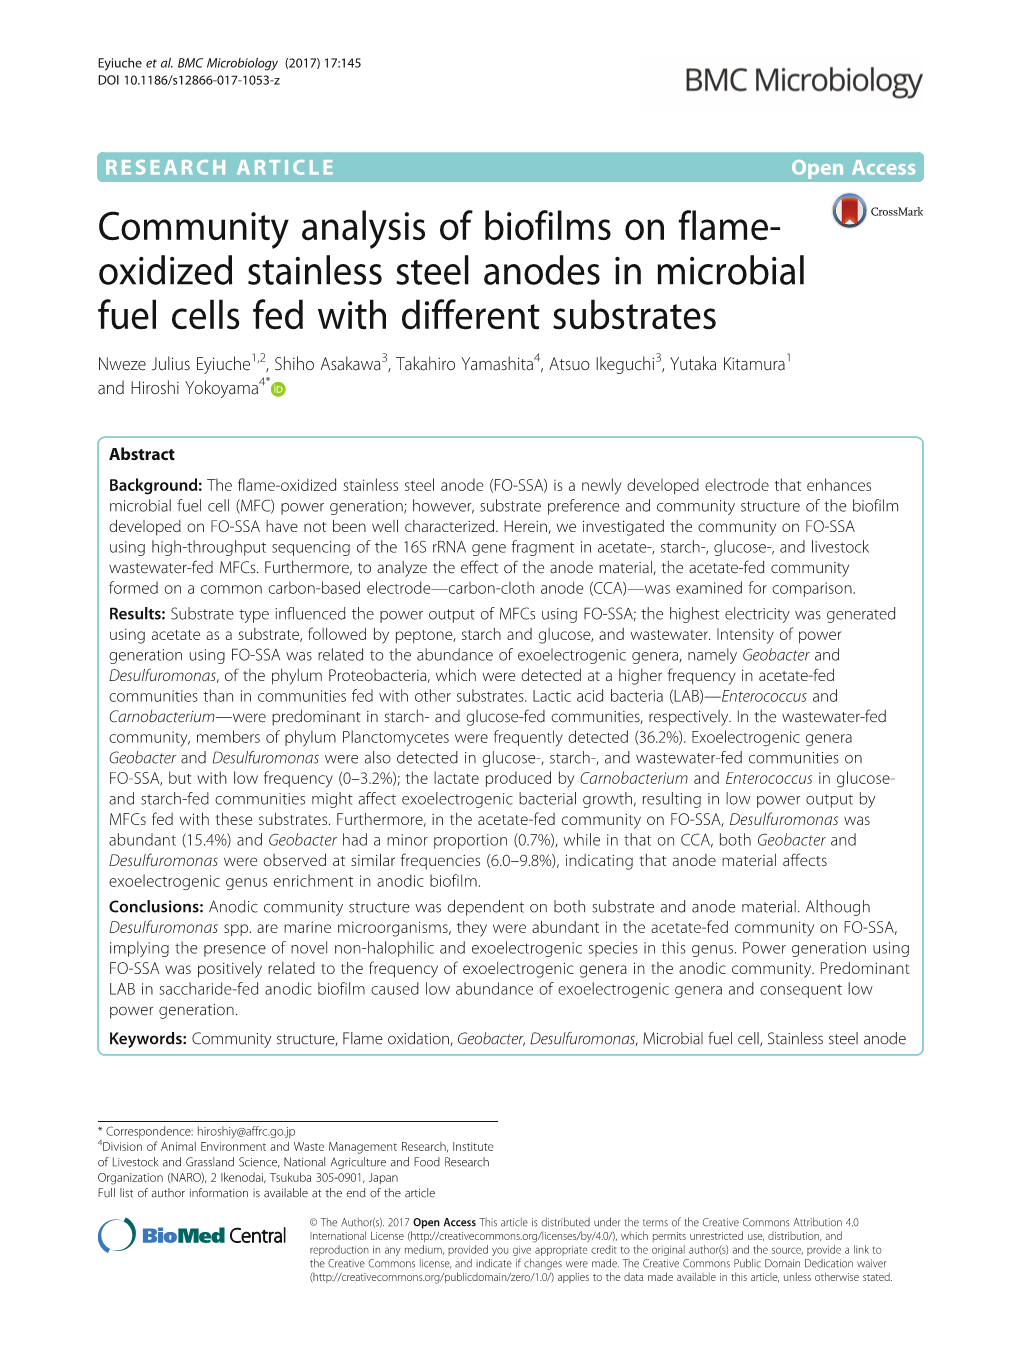 Community Analysis of Biofilms on Flame-Oxidized Stainless Steel